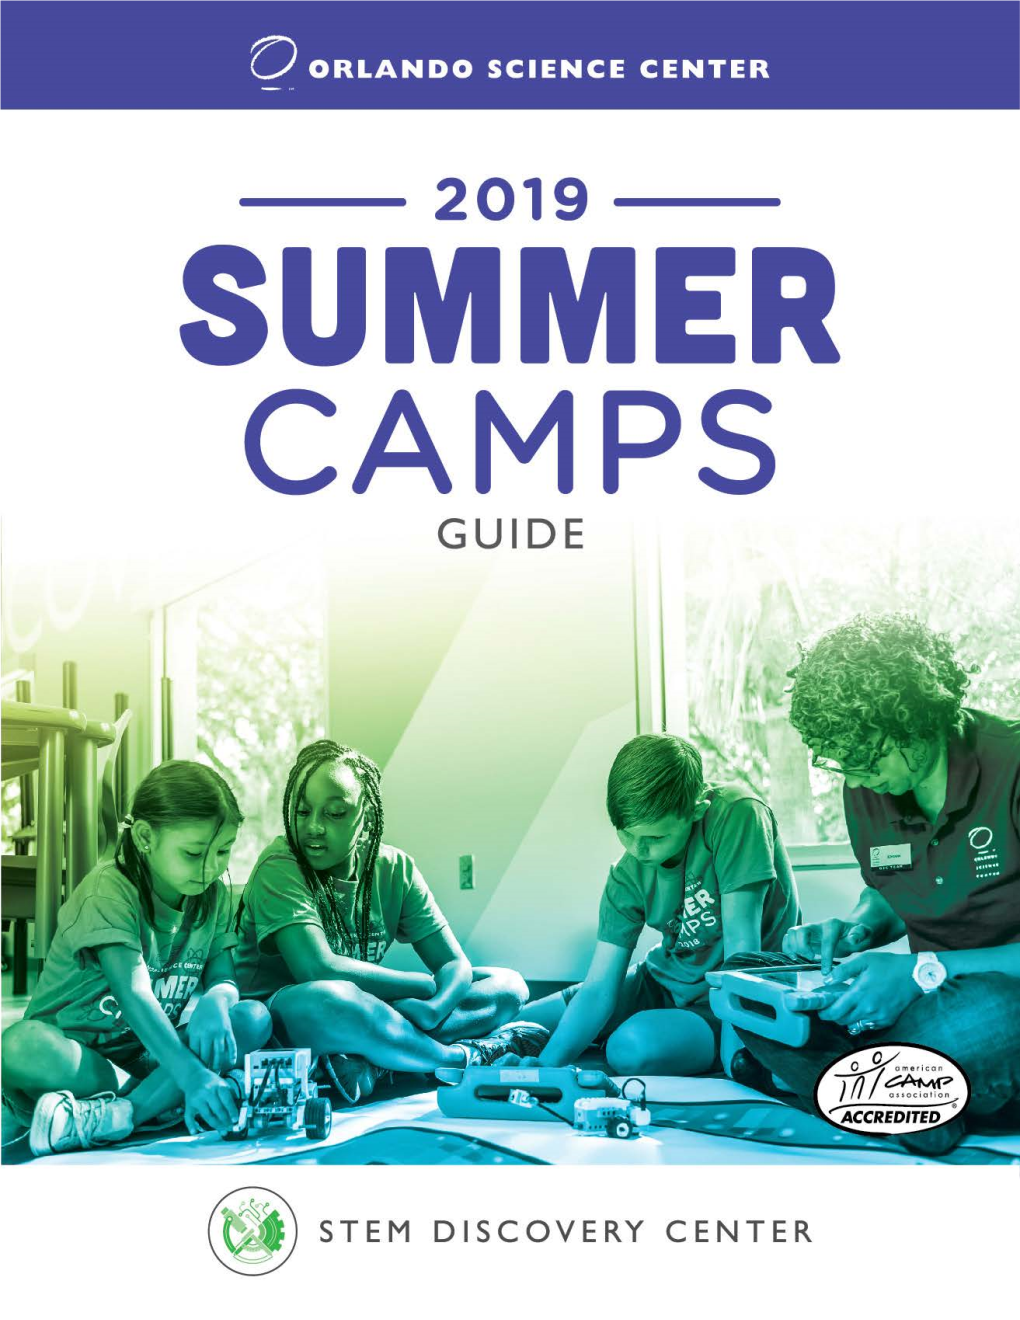 2019 Summer Camps Guide 1 2019 Summer Camps Guide